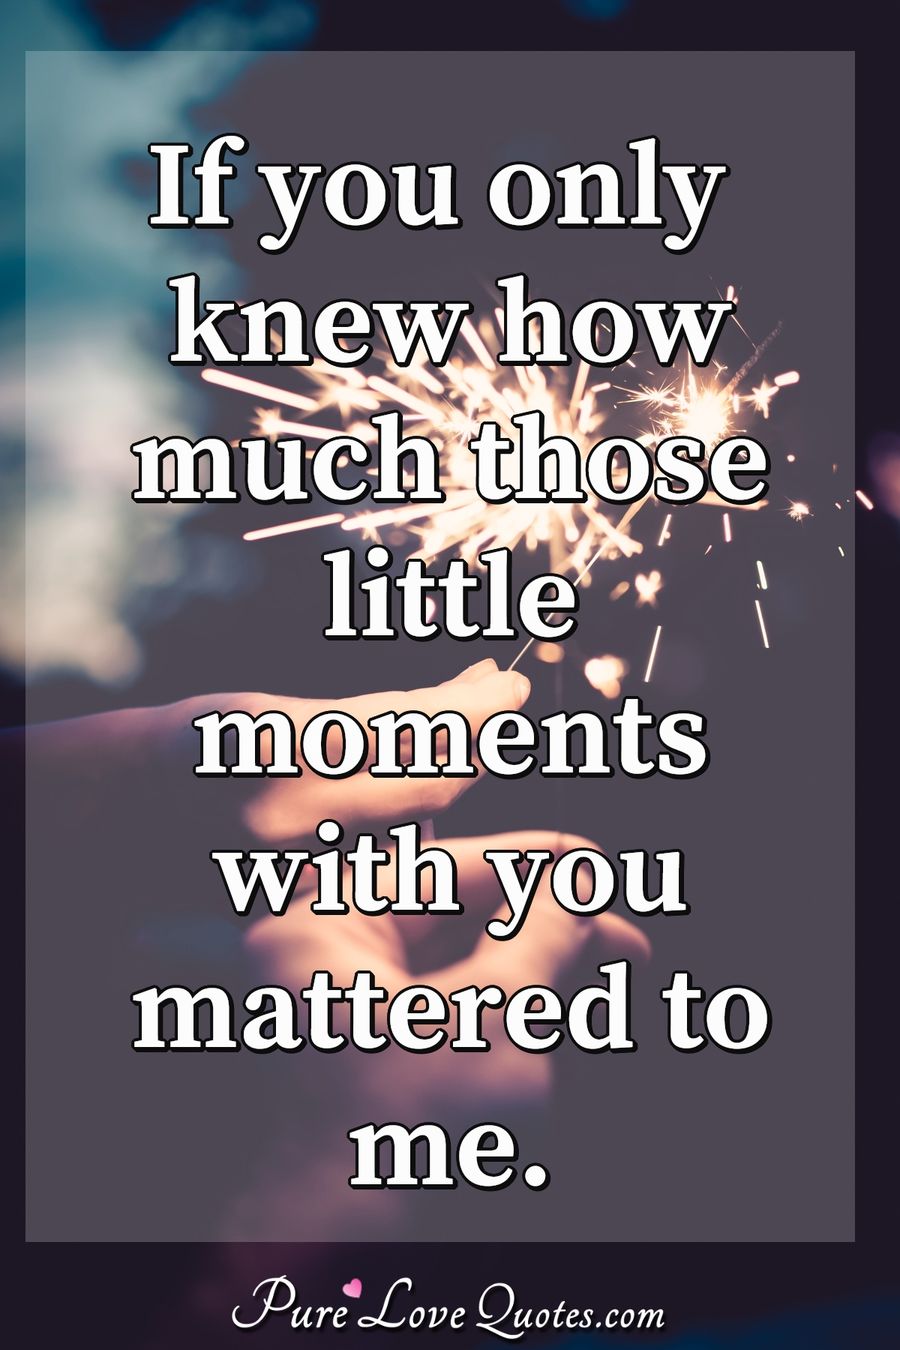 If you only knew how much those little moments with you mattered to me. - Anonymous